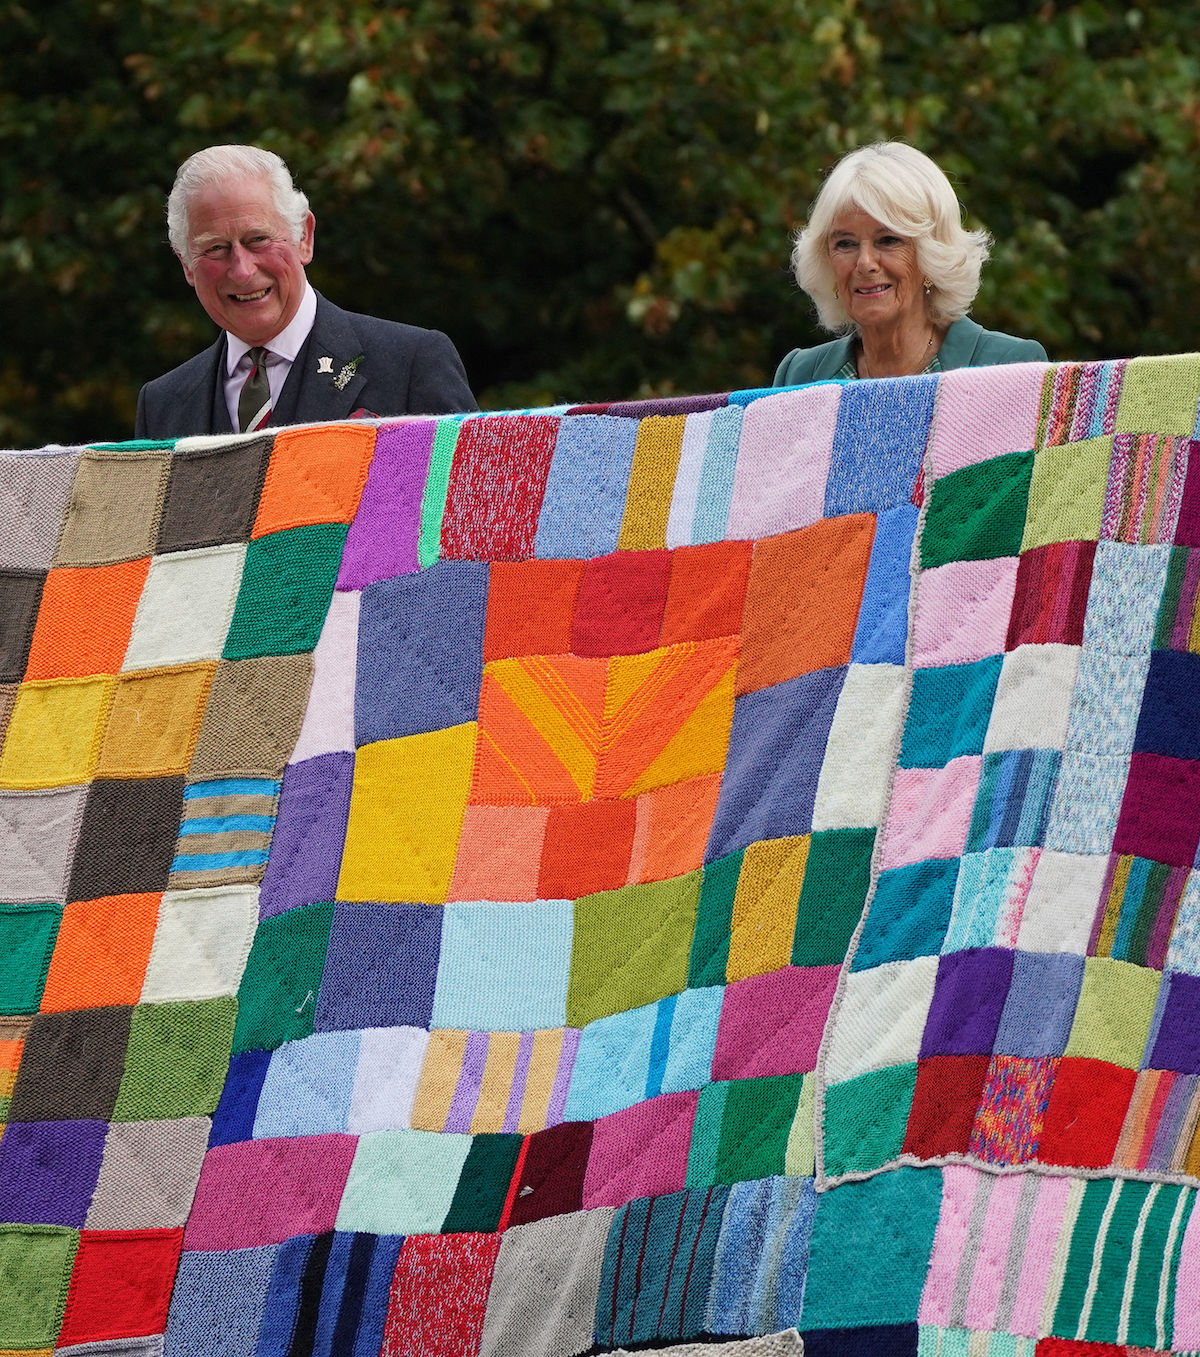 Prince Charles and Camilla Parker Bowles unfurl a multicolor patchwork quilt